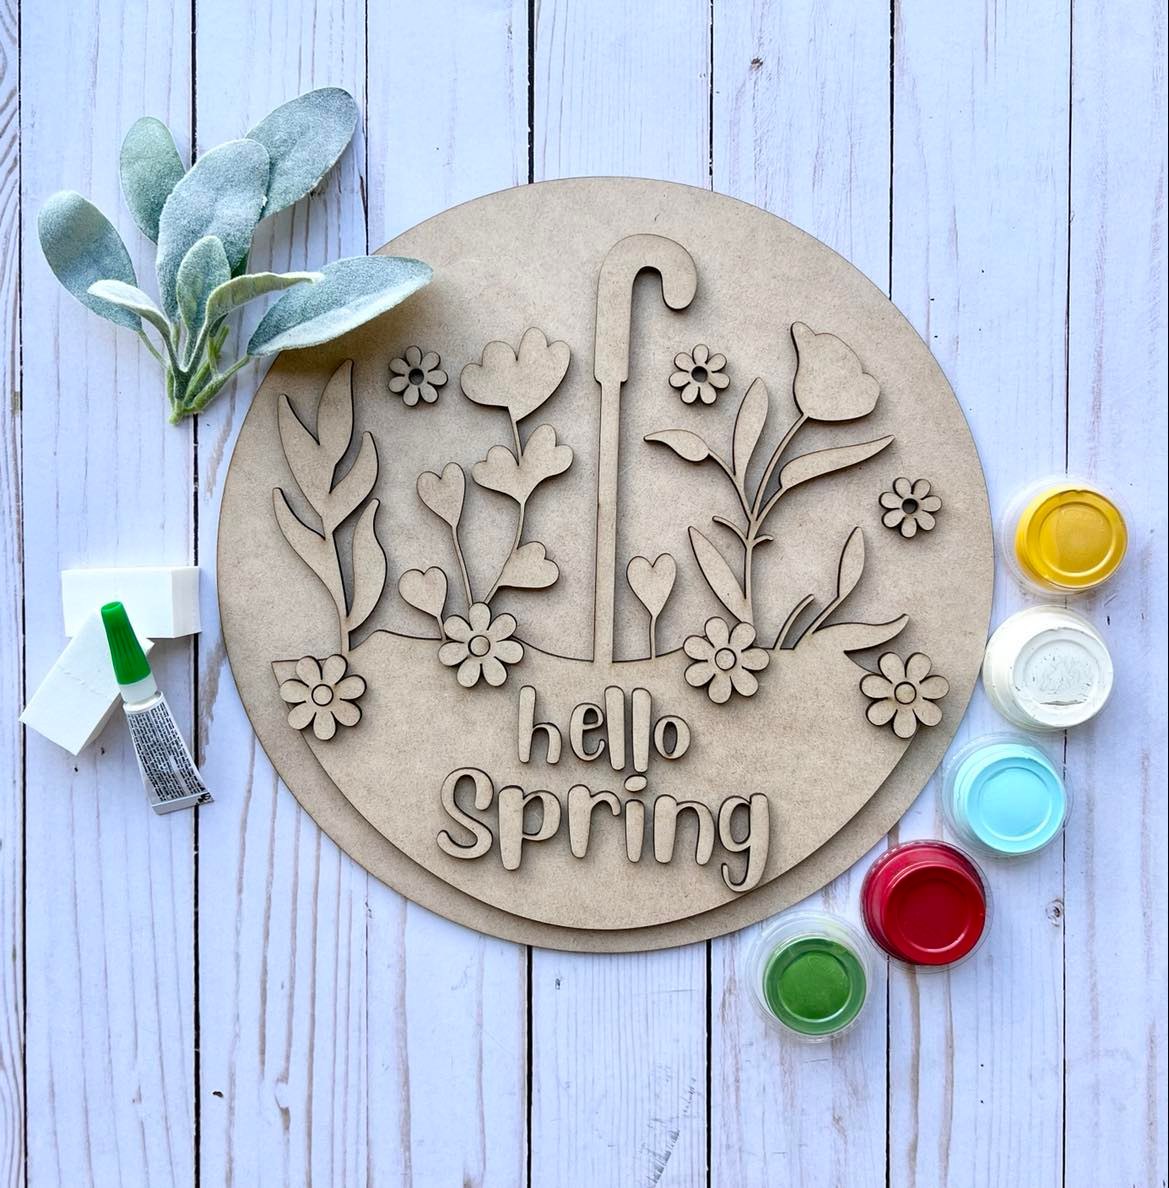 Umbrella Spring Flowers Round Layers Sign Kit - Ready to Paint